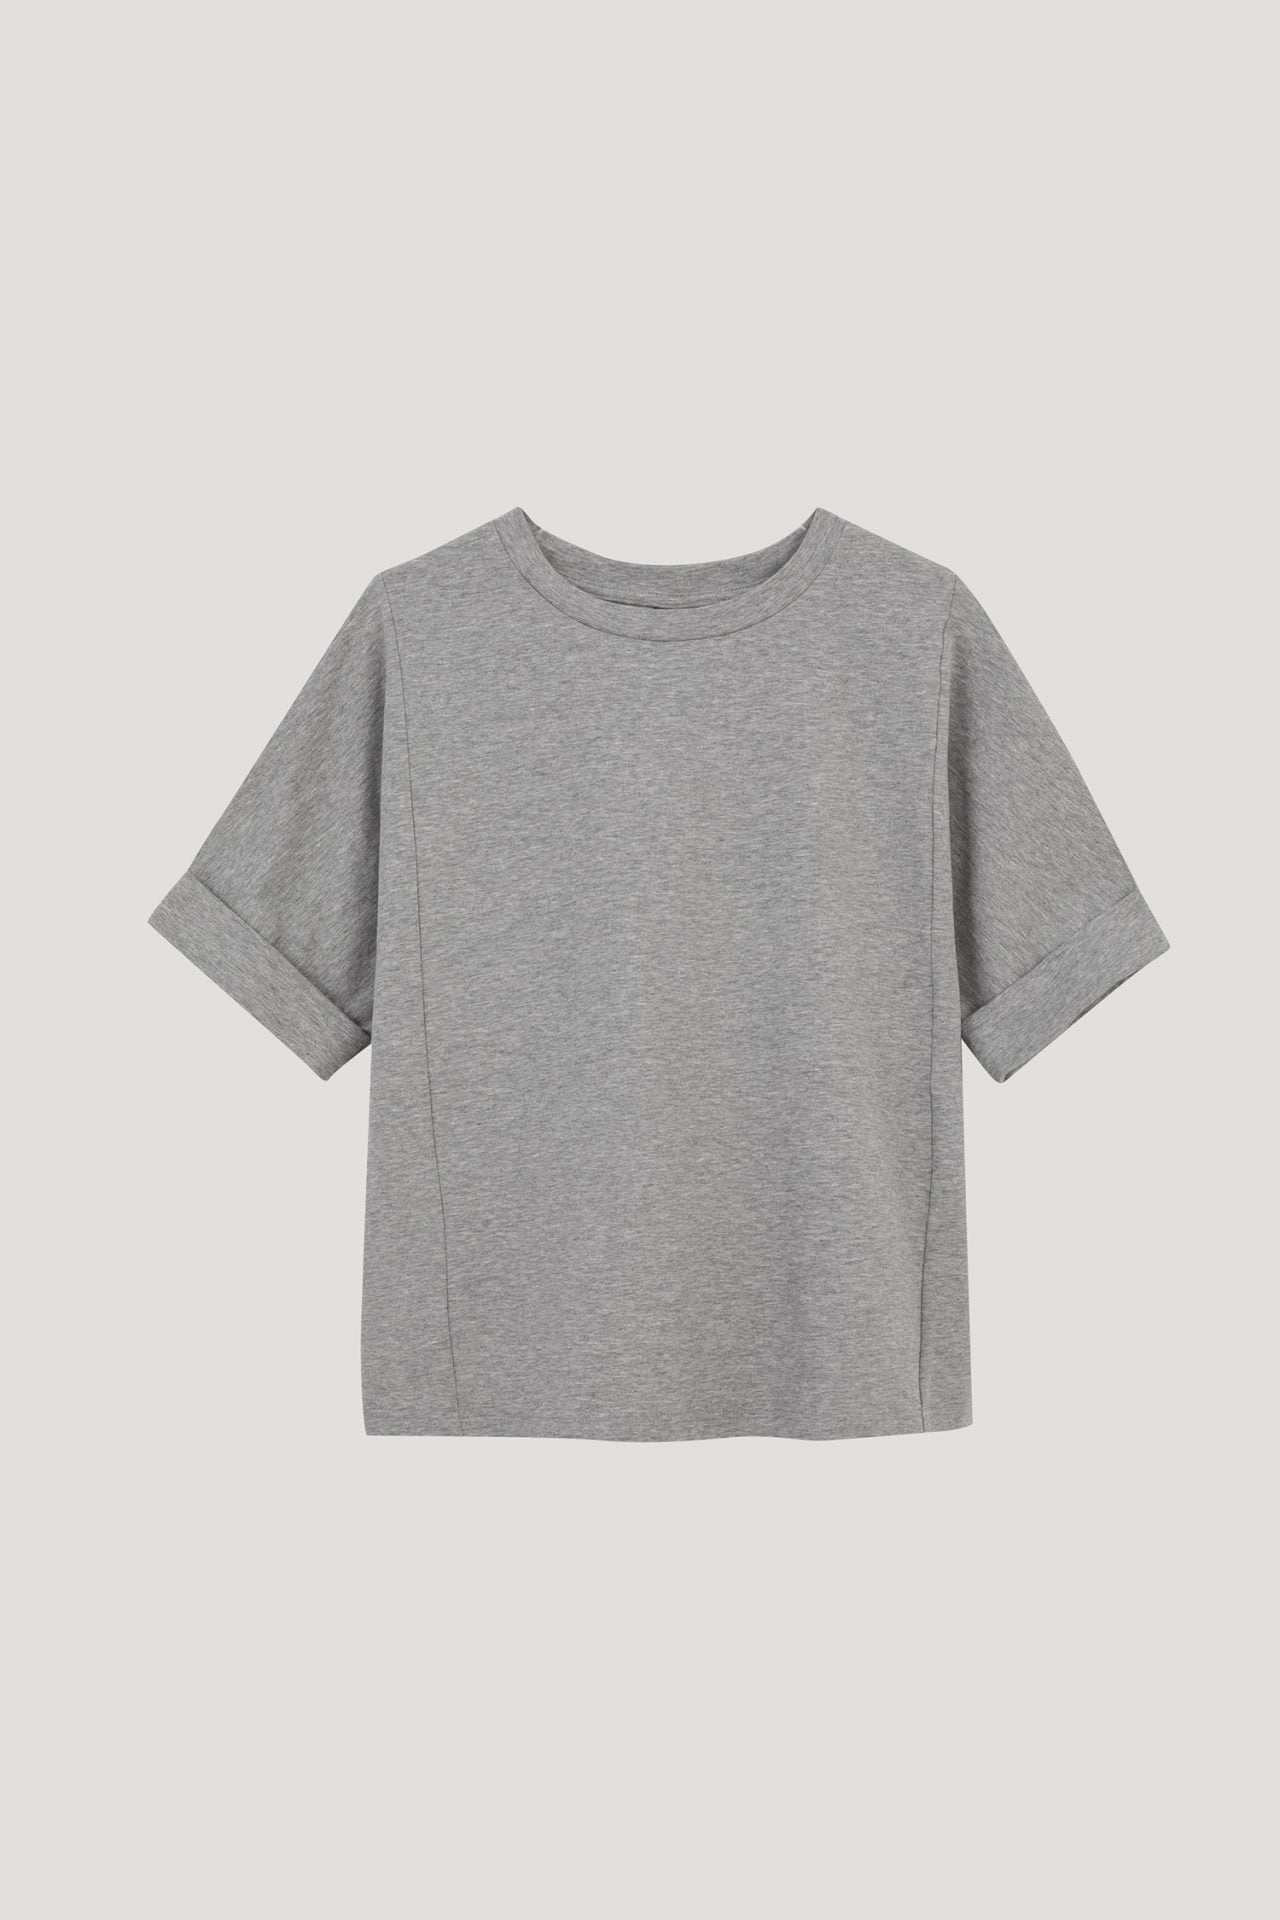 AT 9785 FOLDED SLEEVES TOP LIGHT GREY